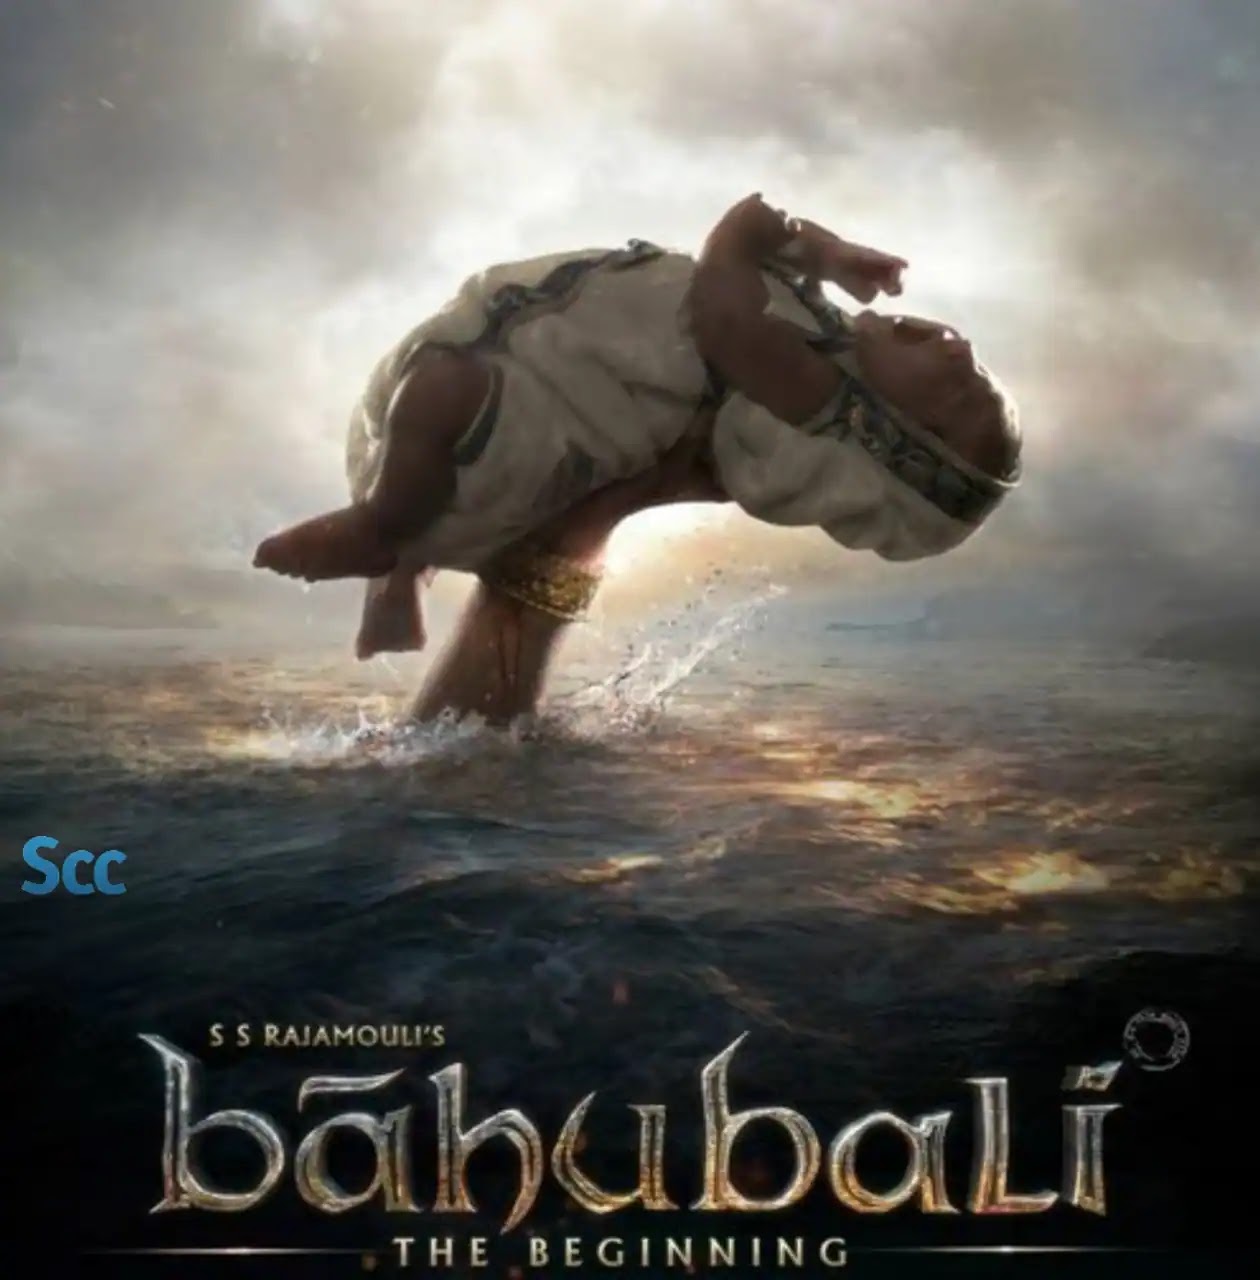 Bahubali full hd movie download 1080p a first course in systems biology pdf download